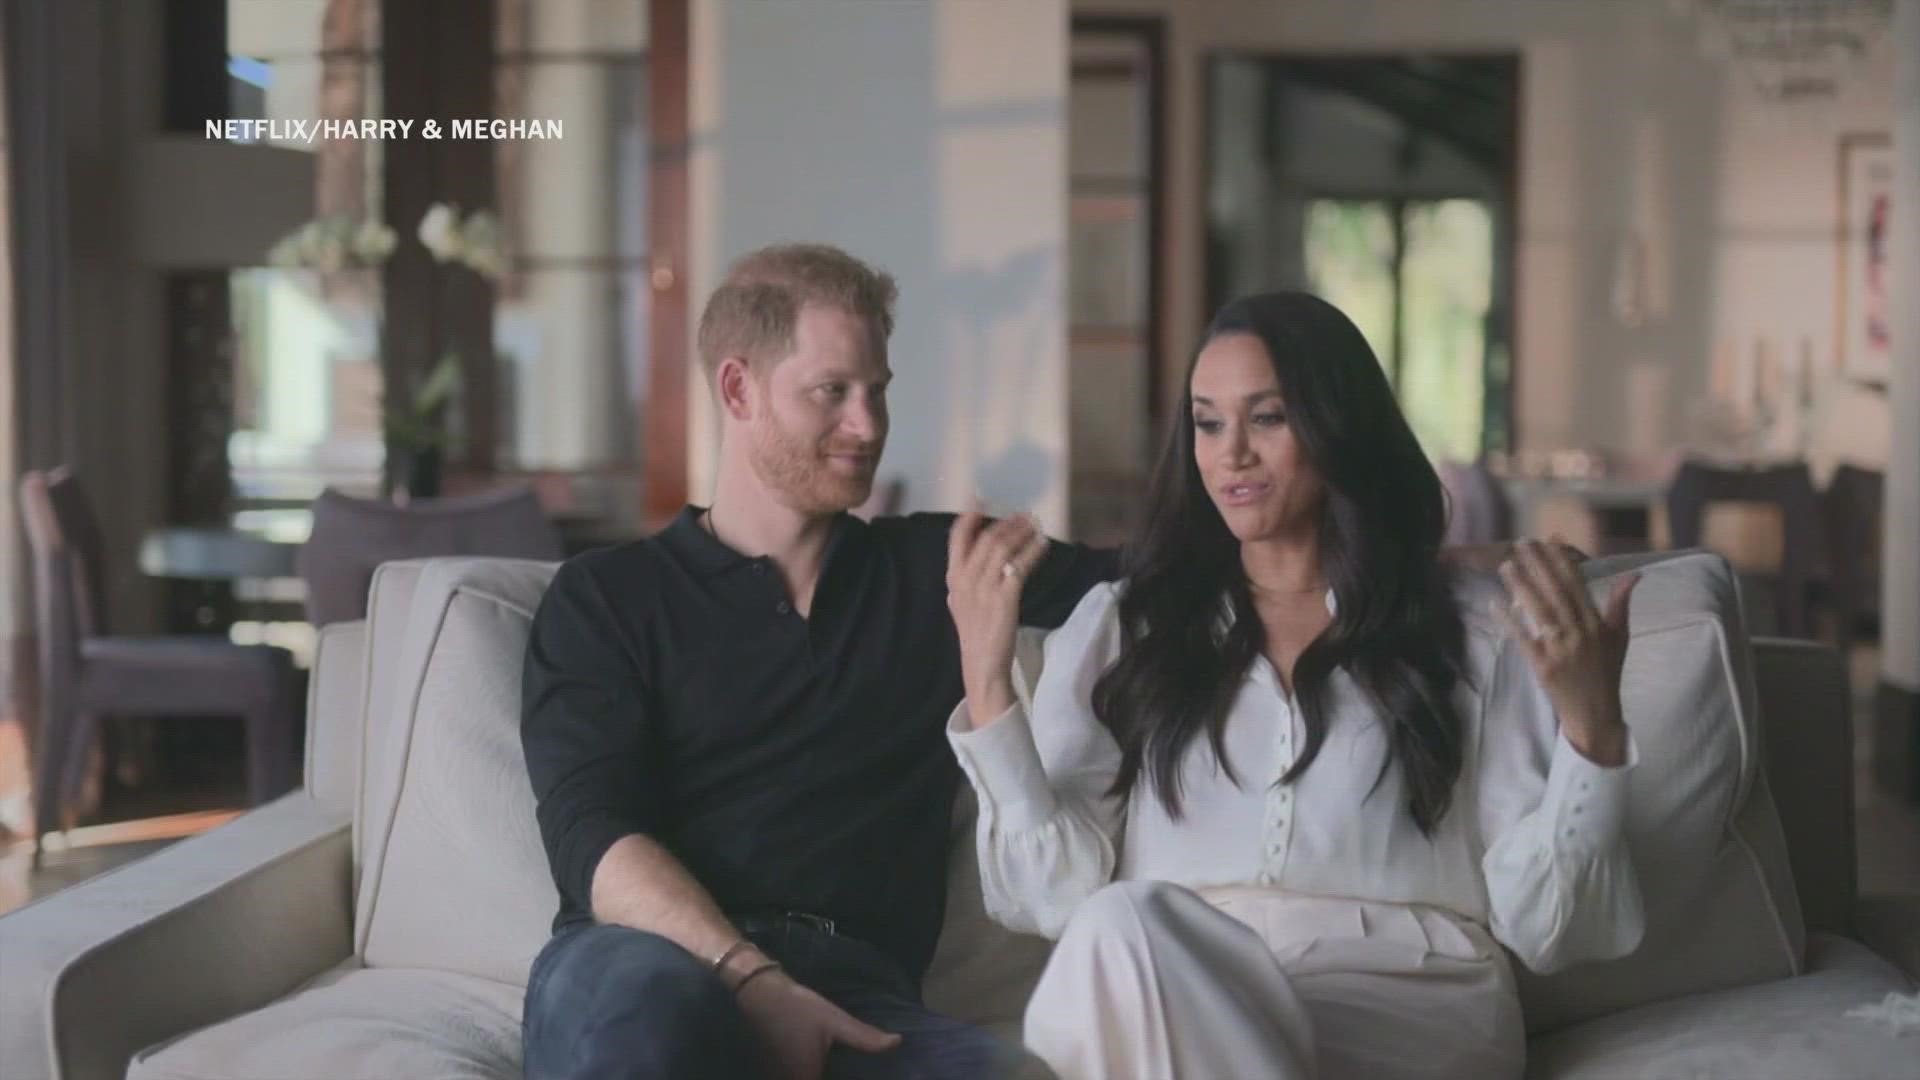 With revealing home videos and private photos, Harry and Meghan's Netflix series tells an unlikely love story.